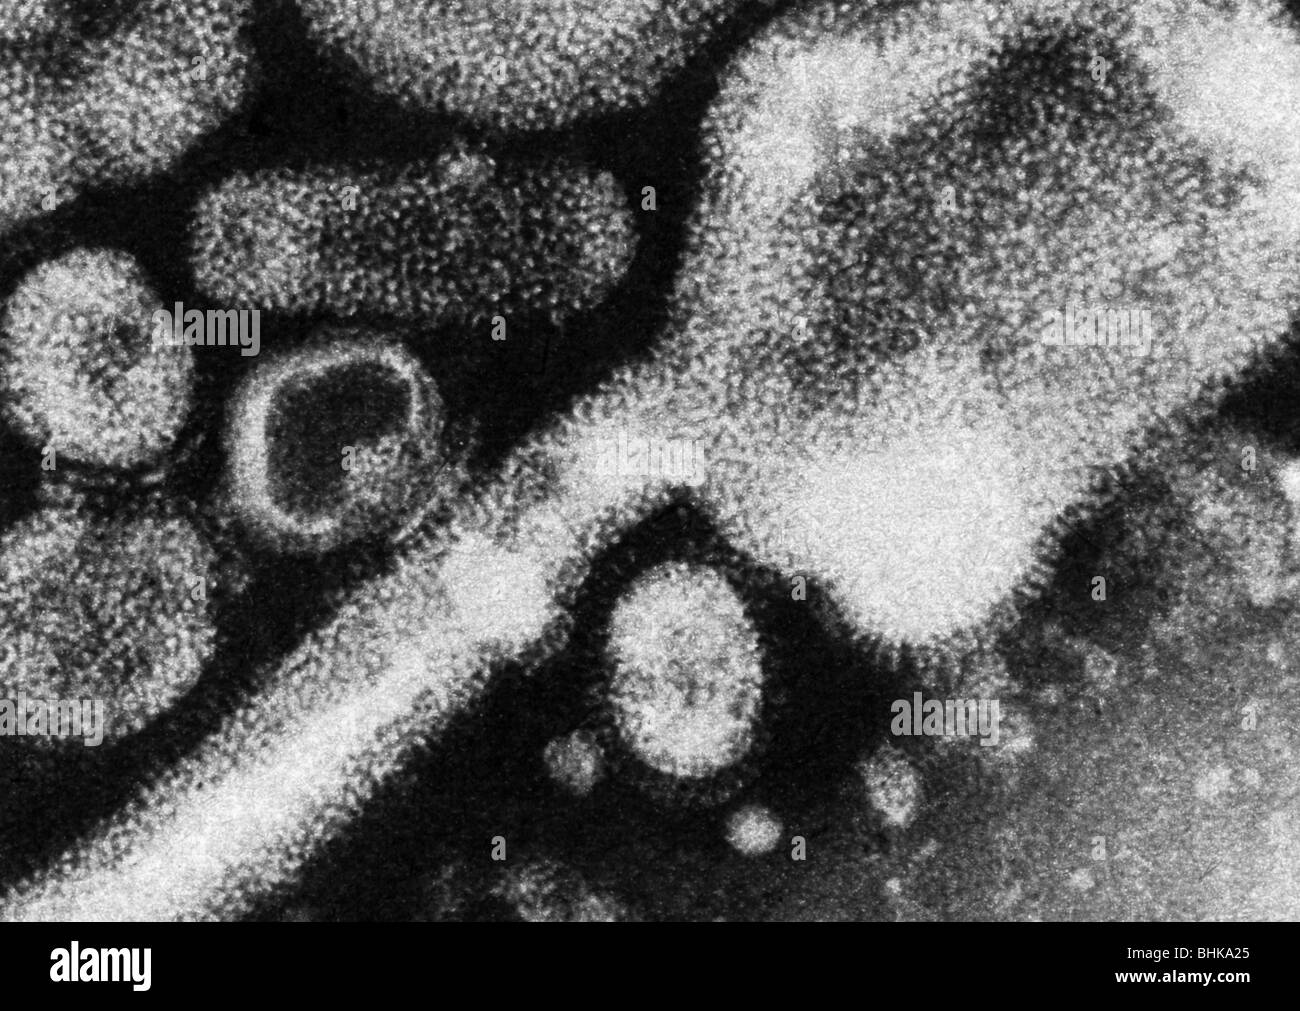 medicine, disease, influenza, Hong Kong Flu, 1968 - 1969, the virus, magnified 170.000 times, pandemic, epidemic, epidemics pandemics, pathogen, pathogenic germ, agent, pathogens, germs, agents, viruses, historic, historical, diseases, Influenza A/H3N2, 20th century, 1960s, Stock Photo